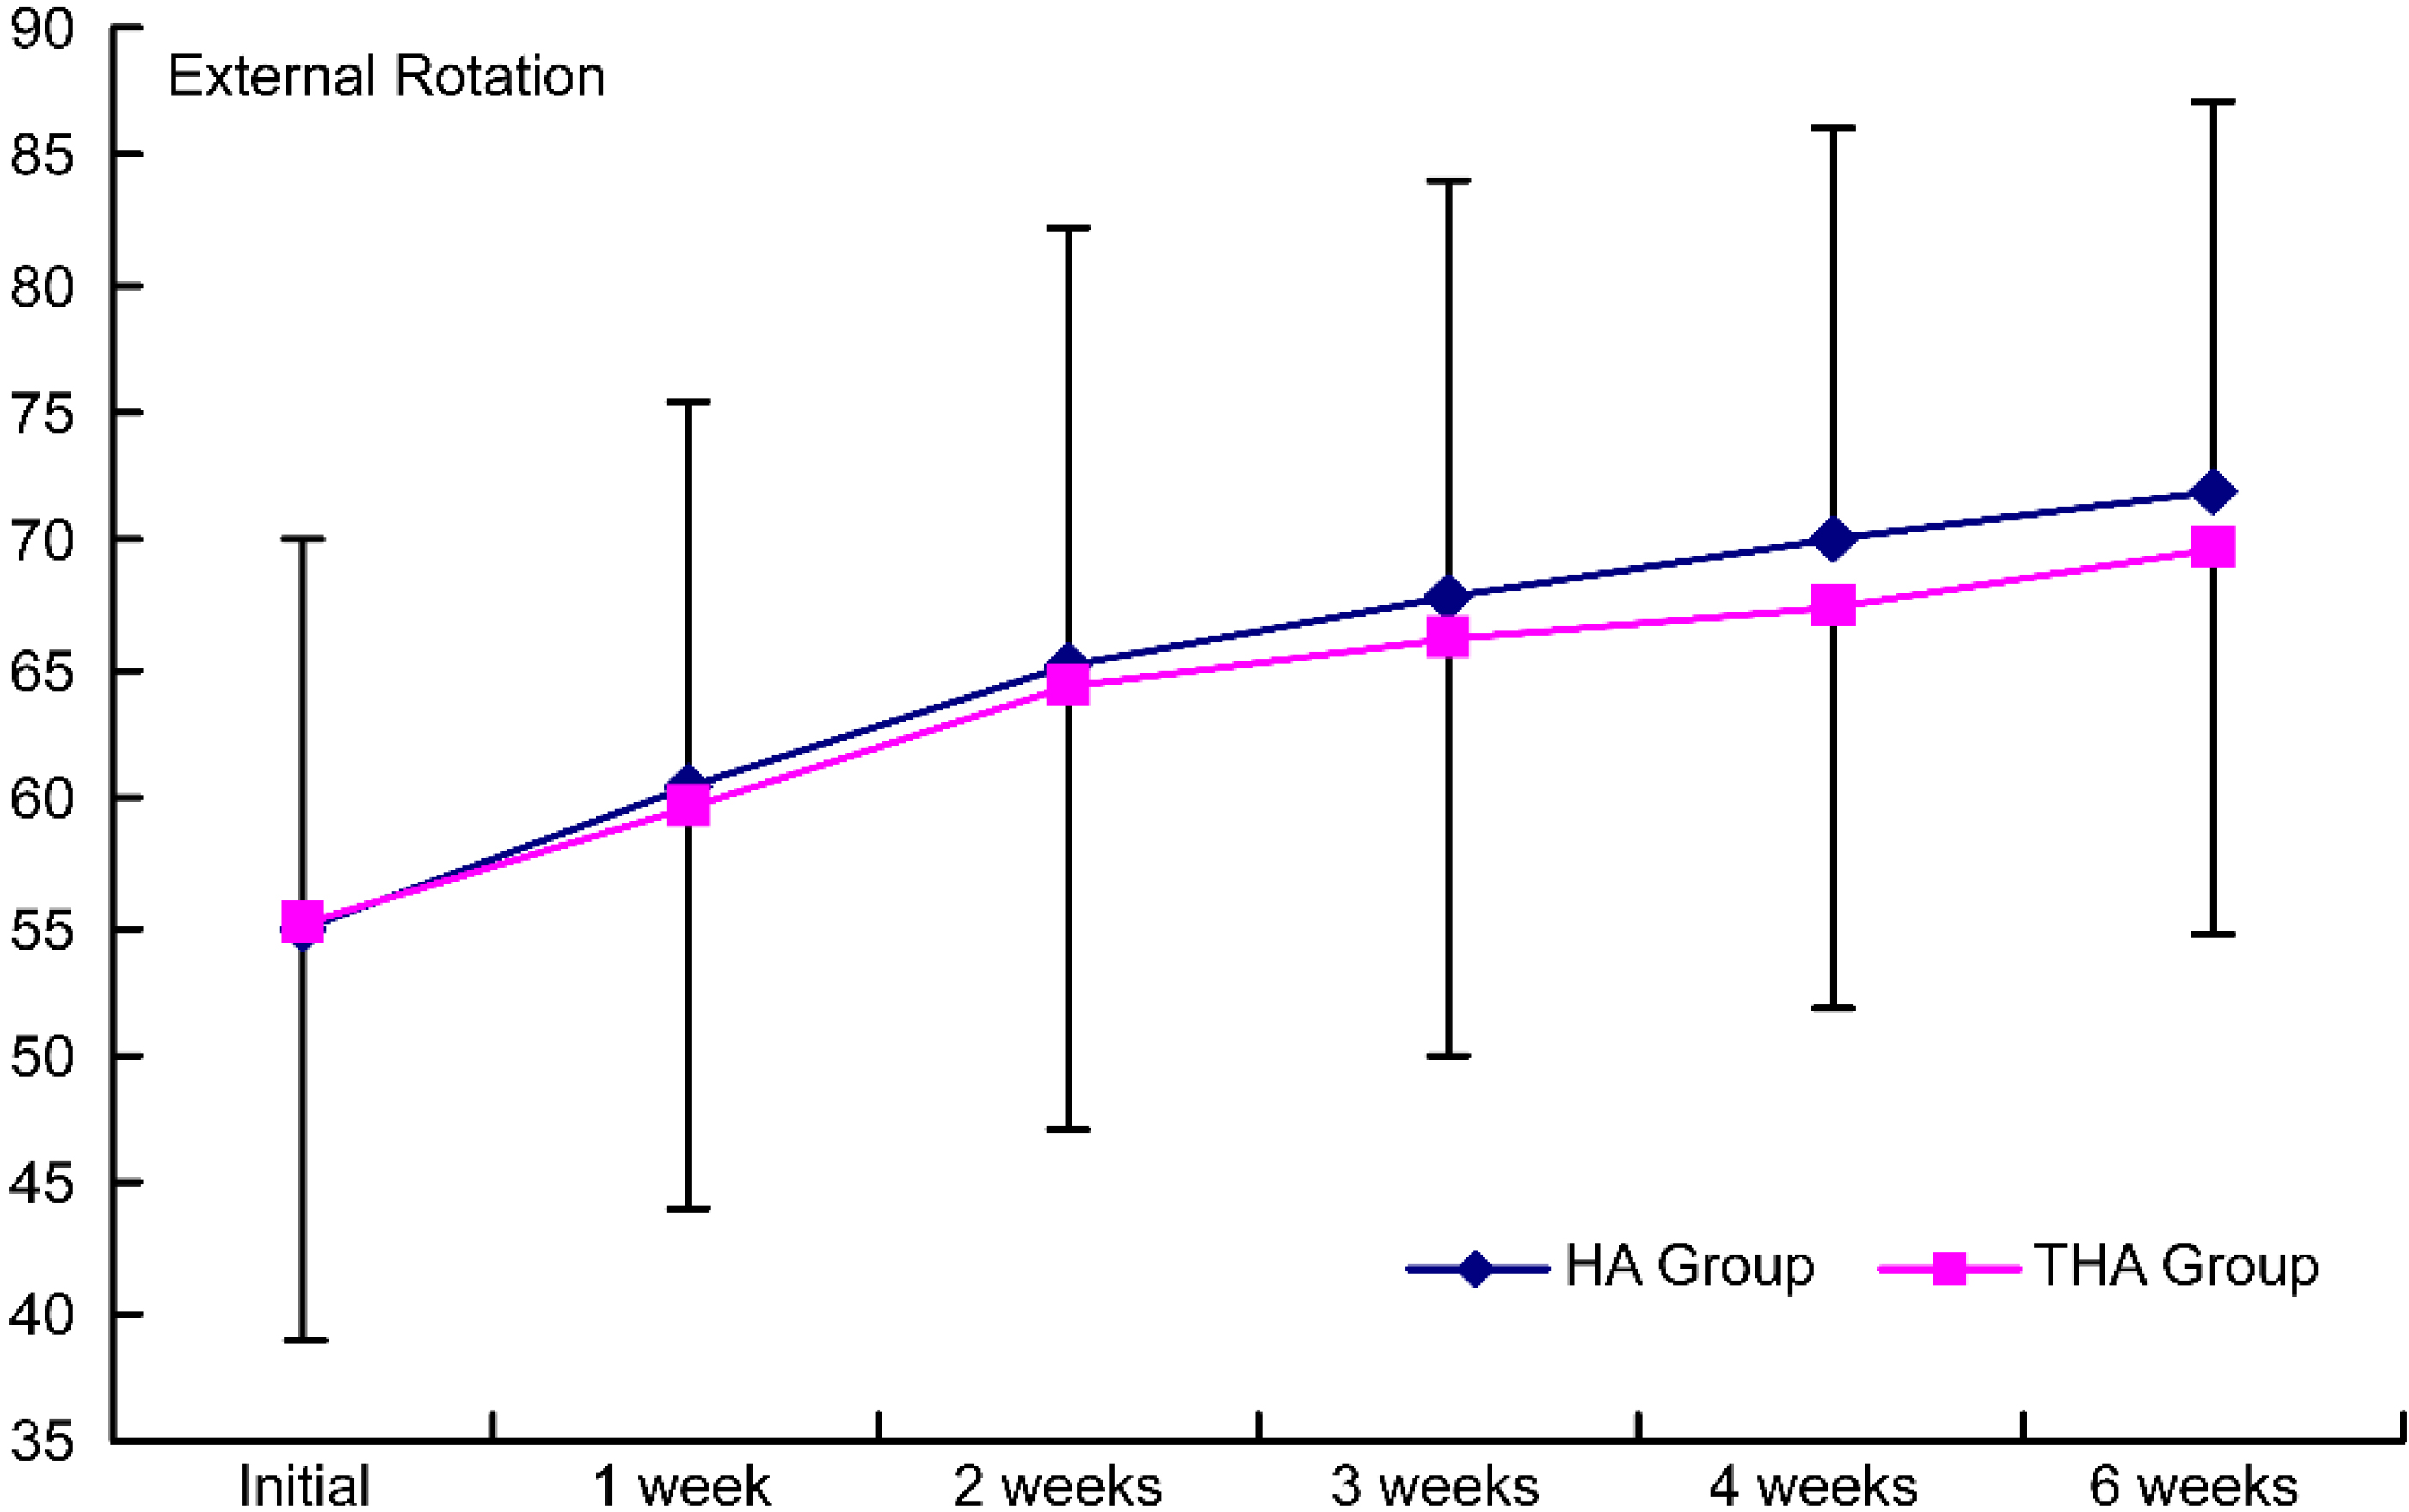 Intergroup comparison of the effects on external rotation by the injection. HA group, hyaluronate group; THA group, hyaluronate plus tramadol group.